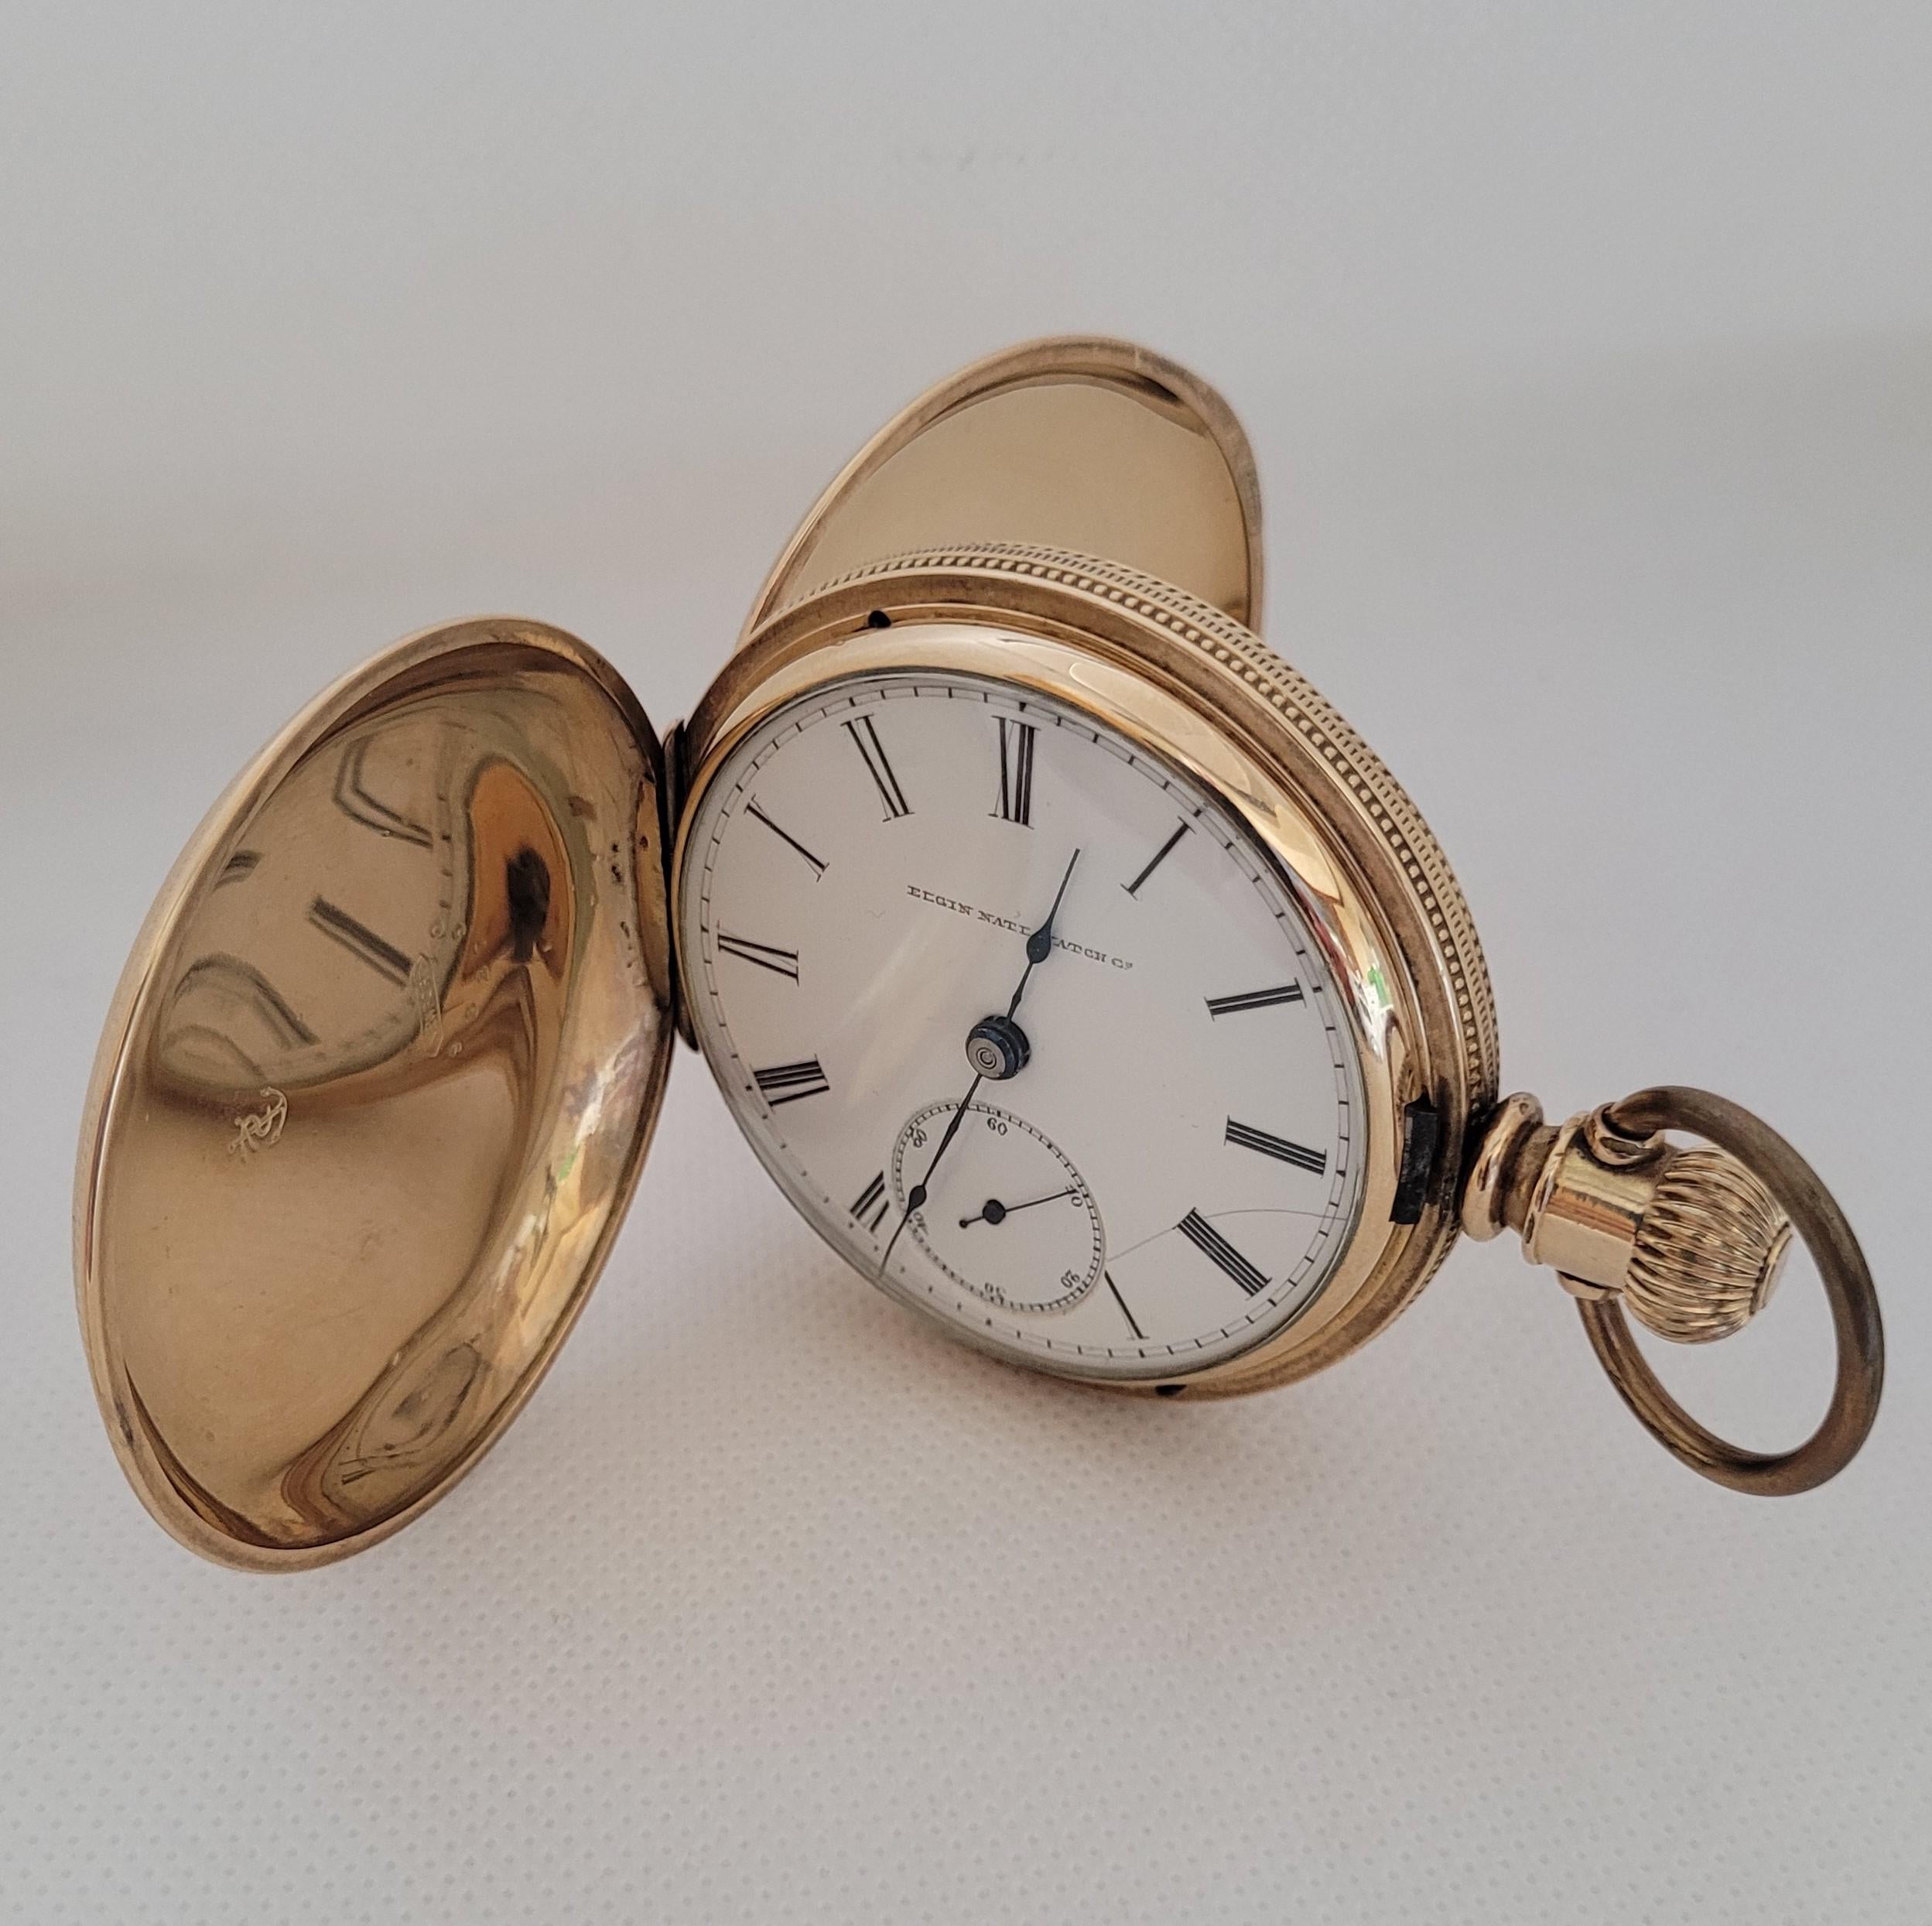 Gold-plated Elgin National Watch Co. 53mm pocket watch, white face, black Roman numerals that has been fully cleaned and serviced and includes a 90-day warranty. The face of the watch has a hairline crack. The case is stamped: Newport caste 982750